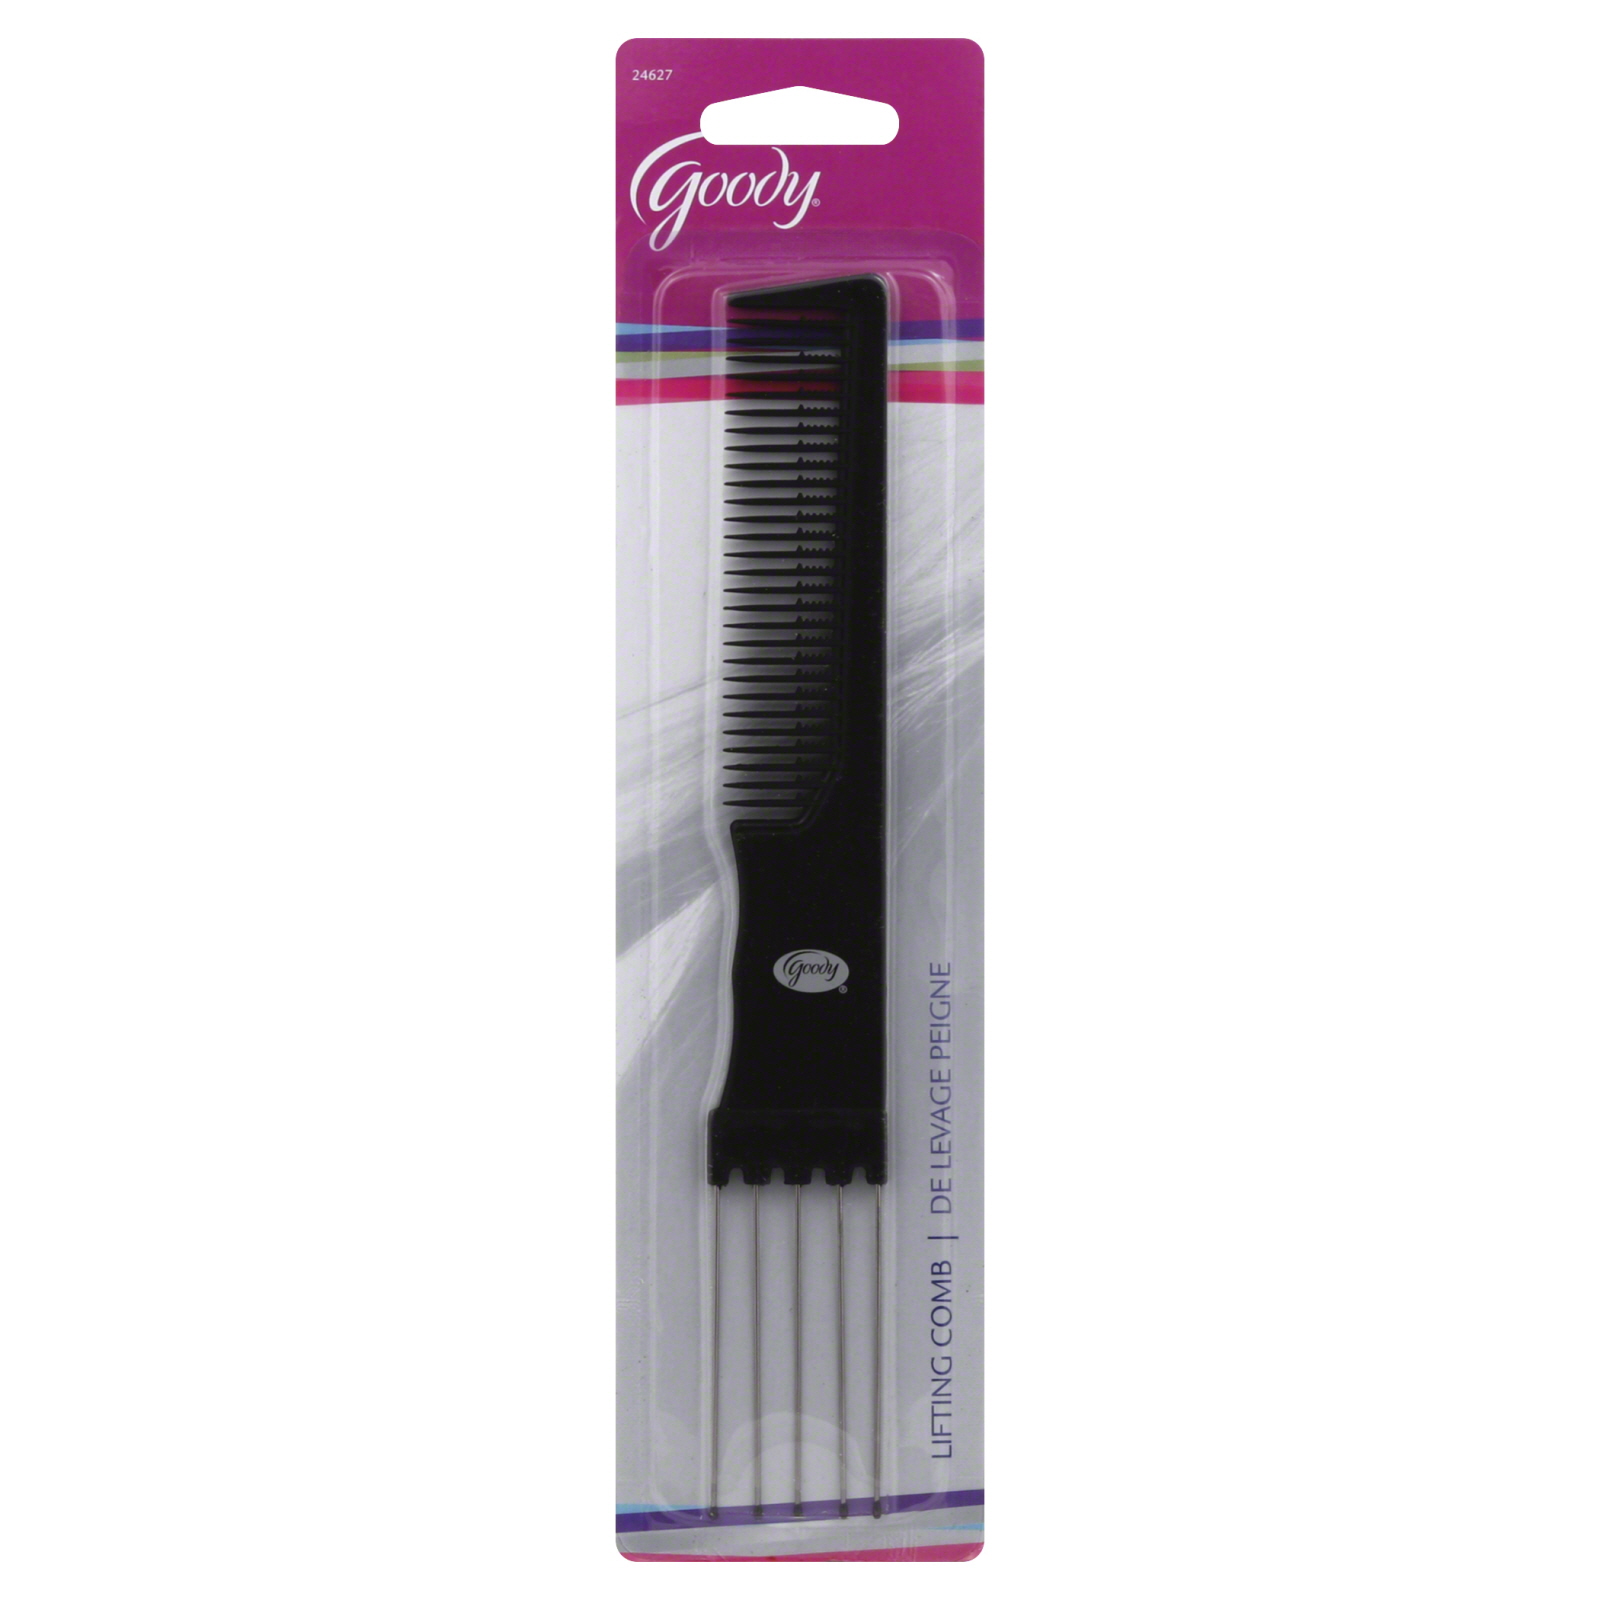 Goody 8" Comb & Lift Assembly, Black, 1 CT